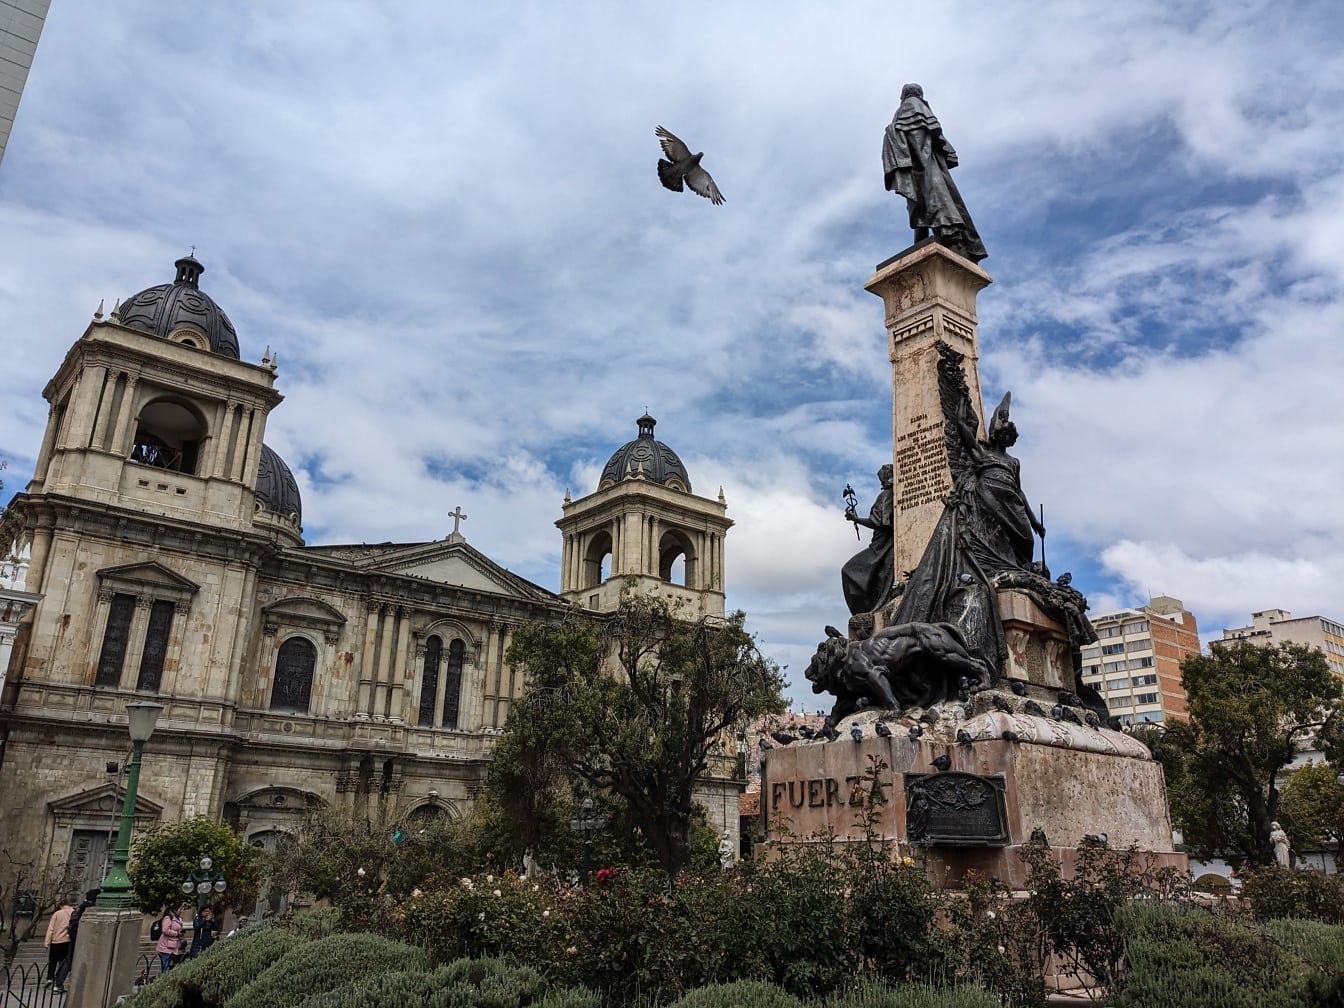 Statue in Murillo square in the city of La Paz in Bolivia in front of a basilica of Our Lady of Peace